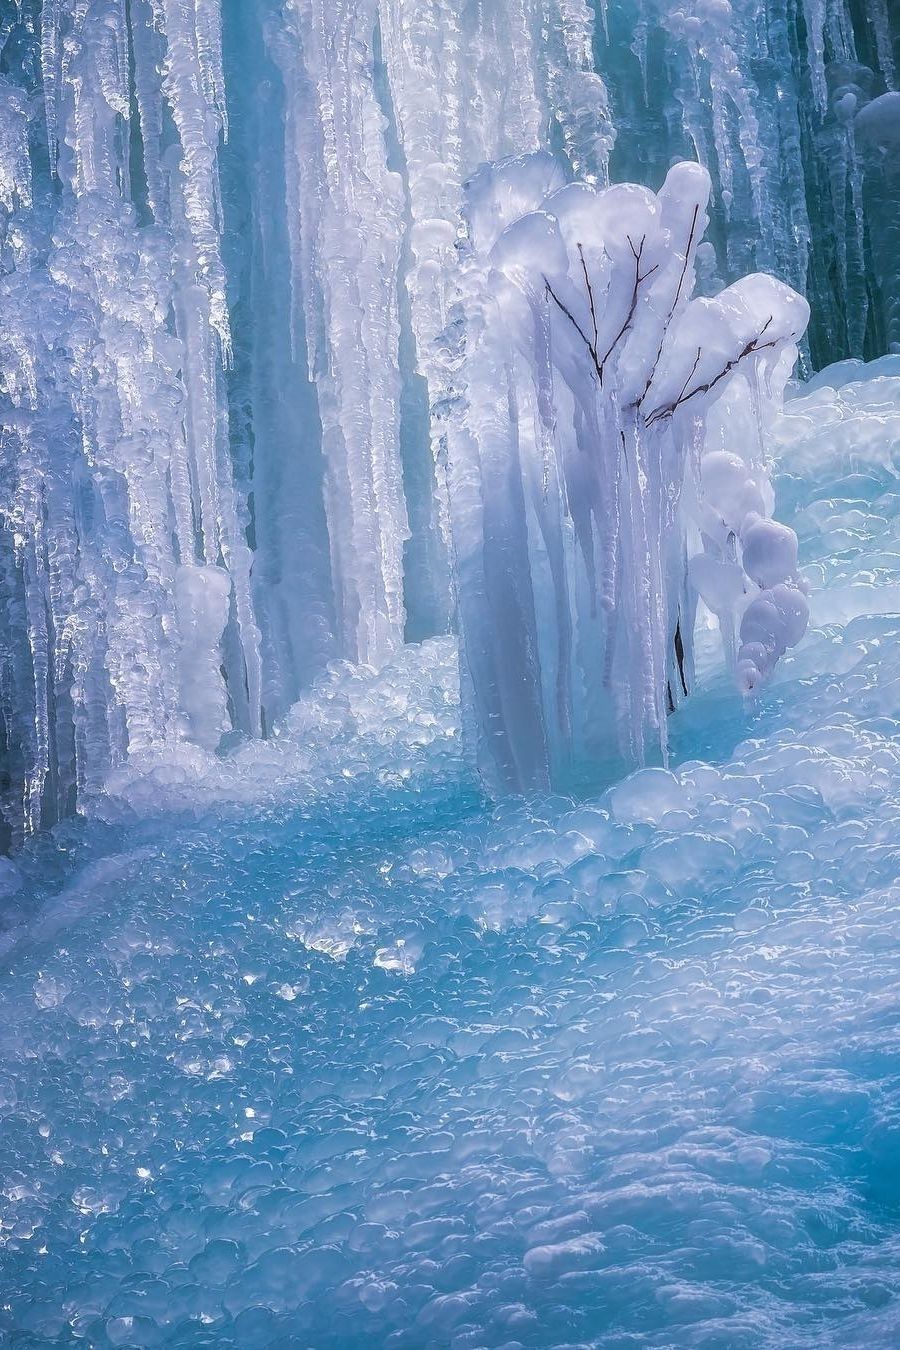 Frozen waterfall in the ice - Ice